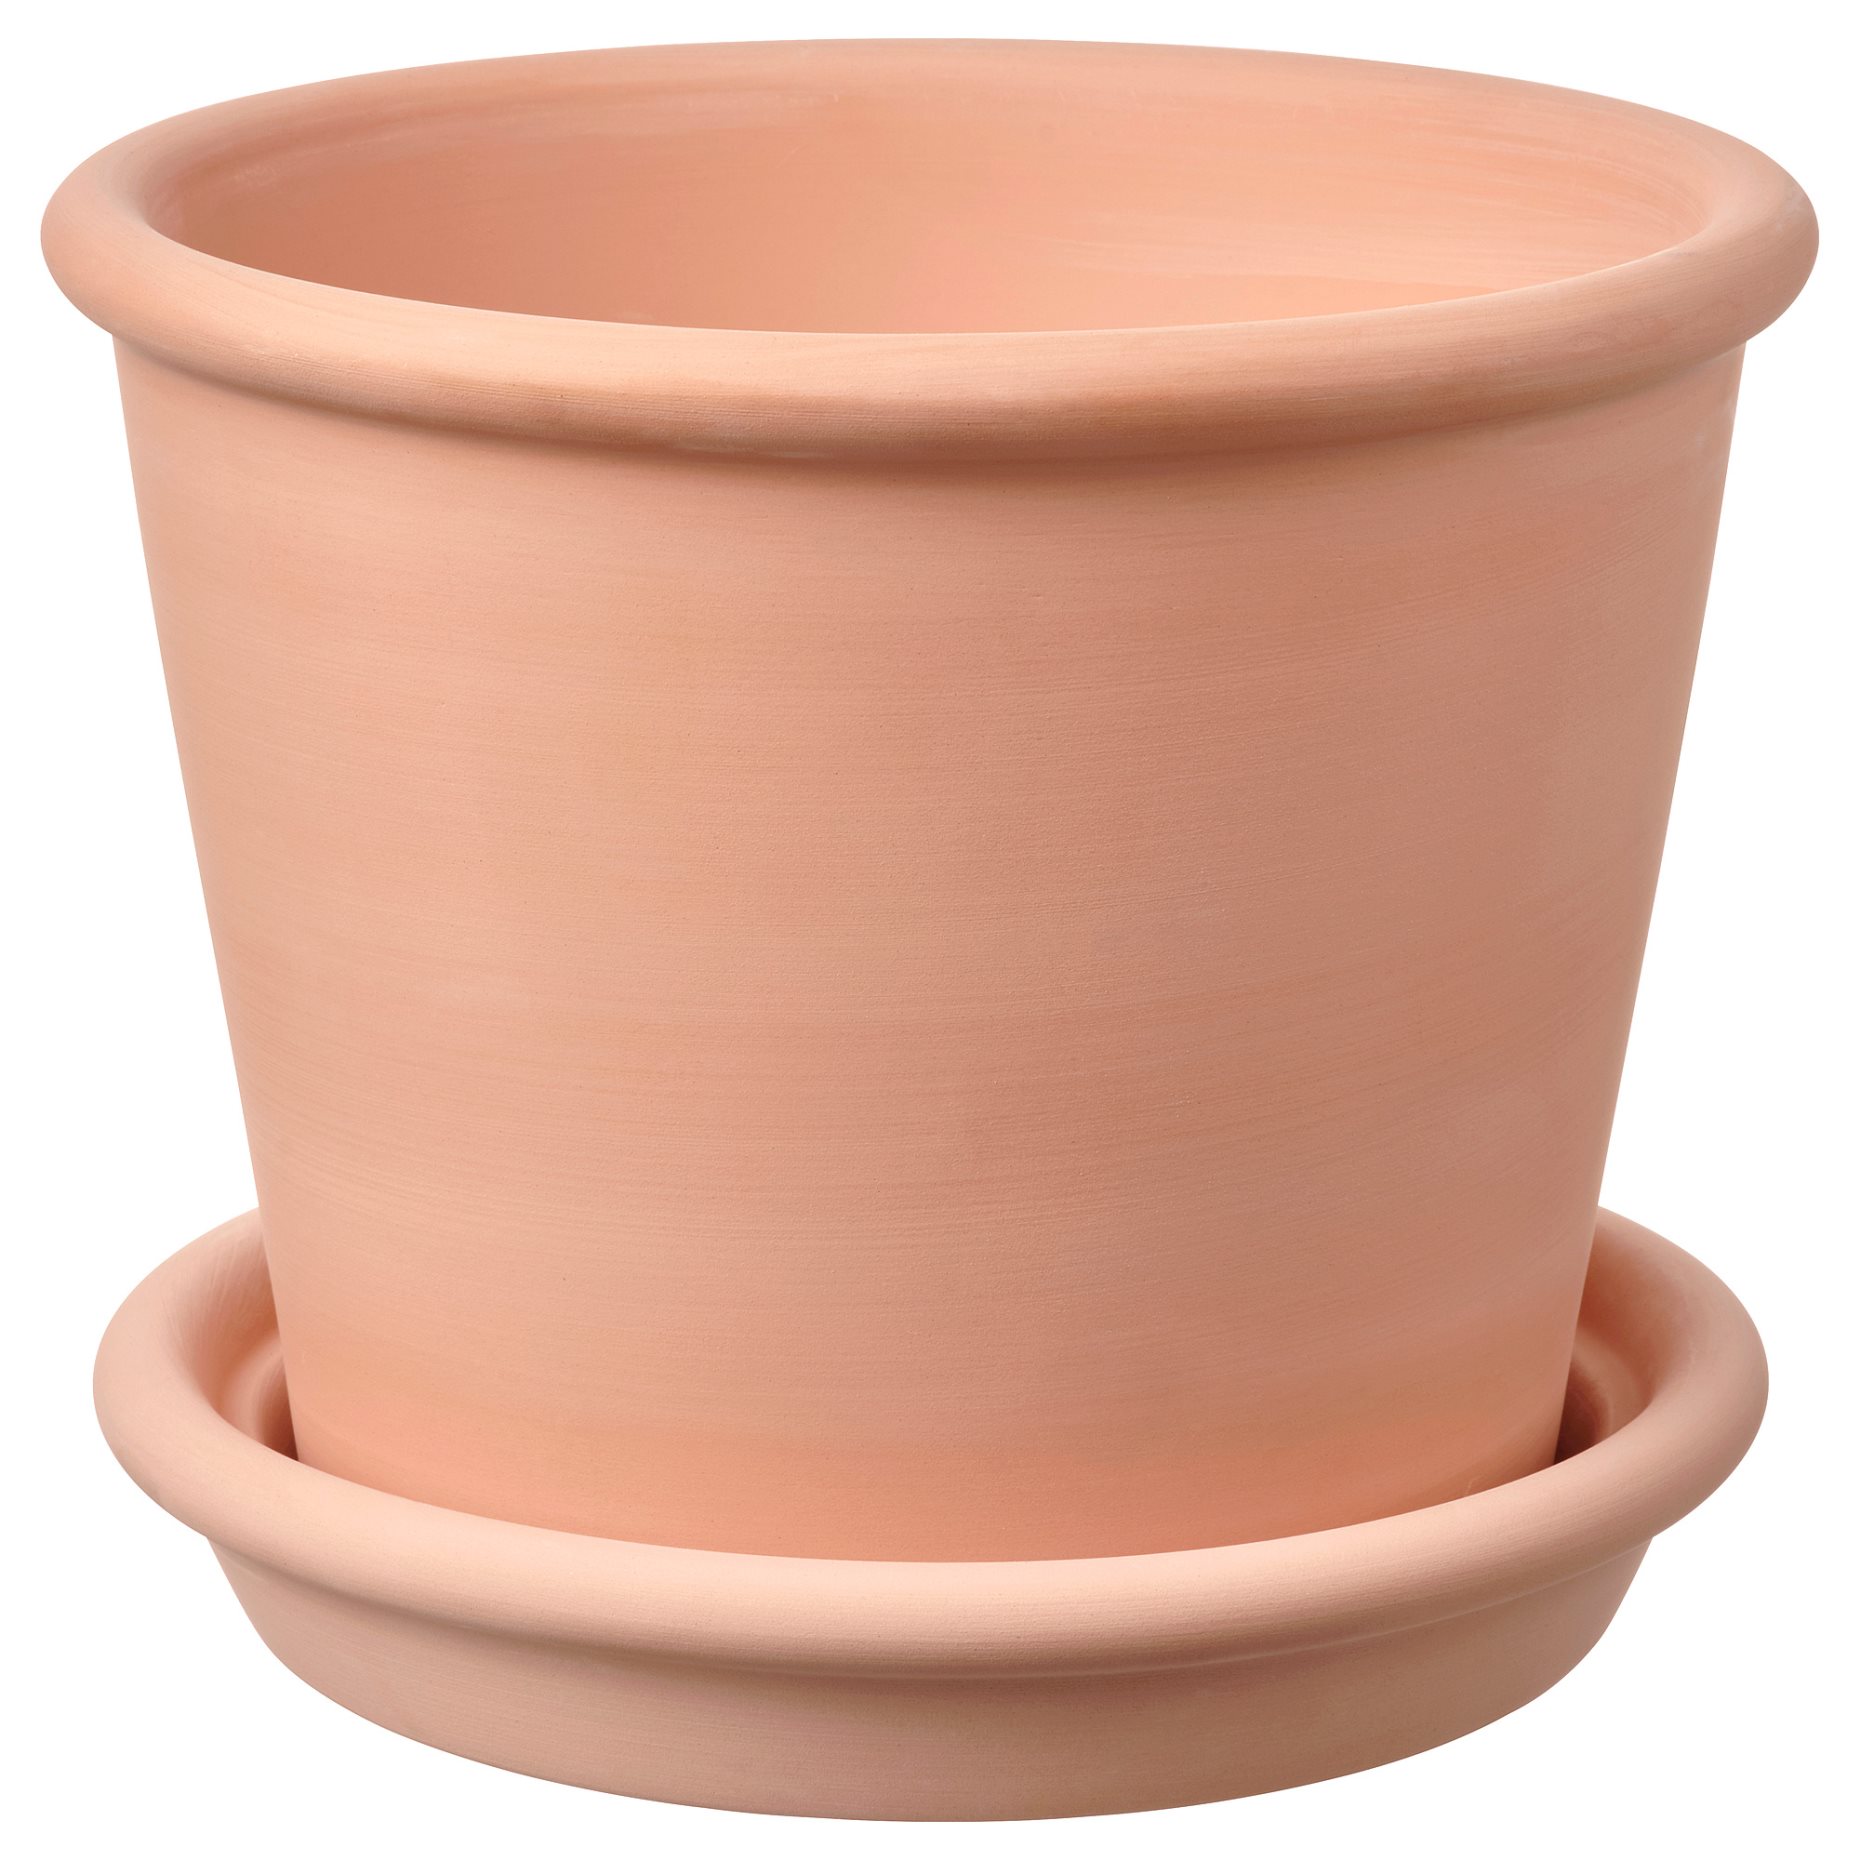 MUSKOTBLOMMA, plant pot with saucer in/outdoor, 15 cm, 304.548.91